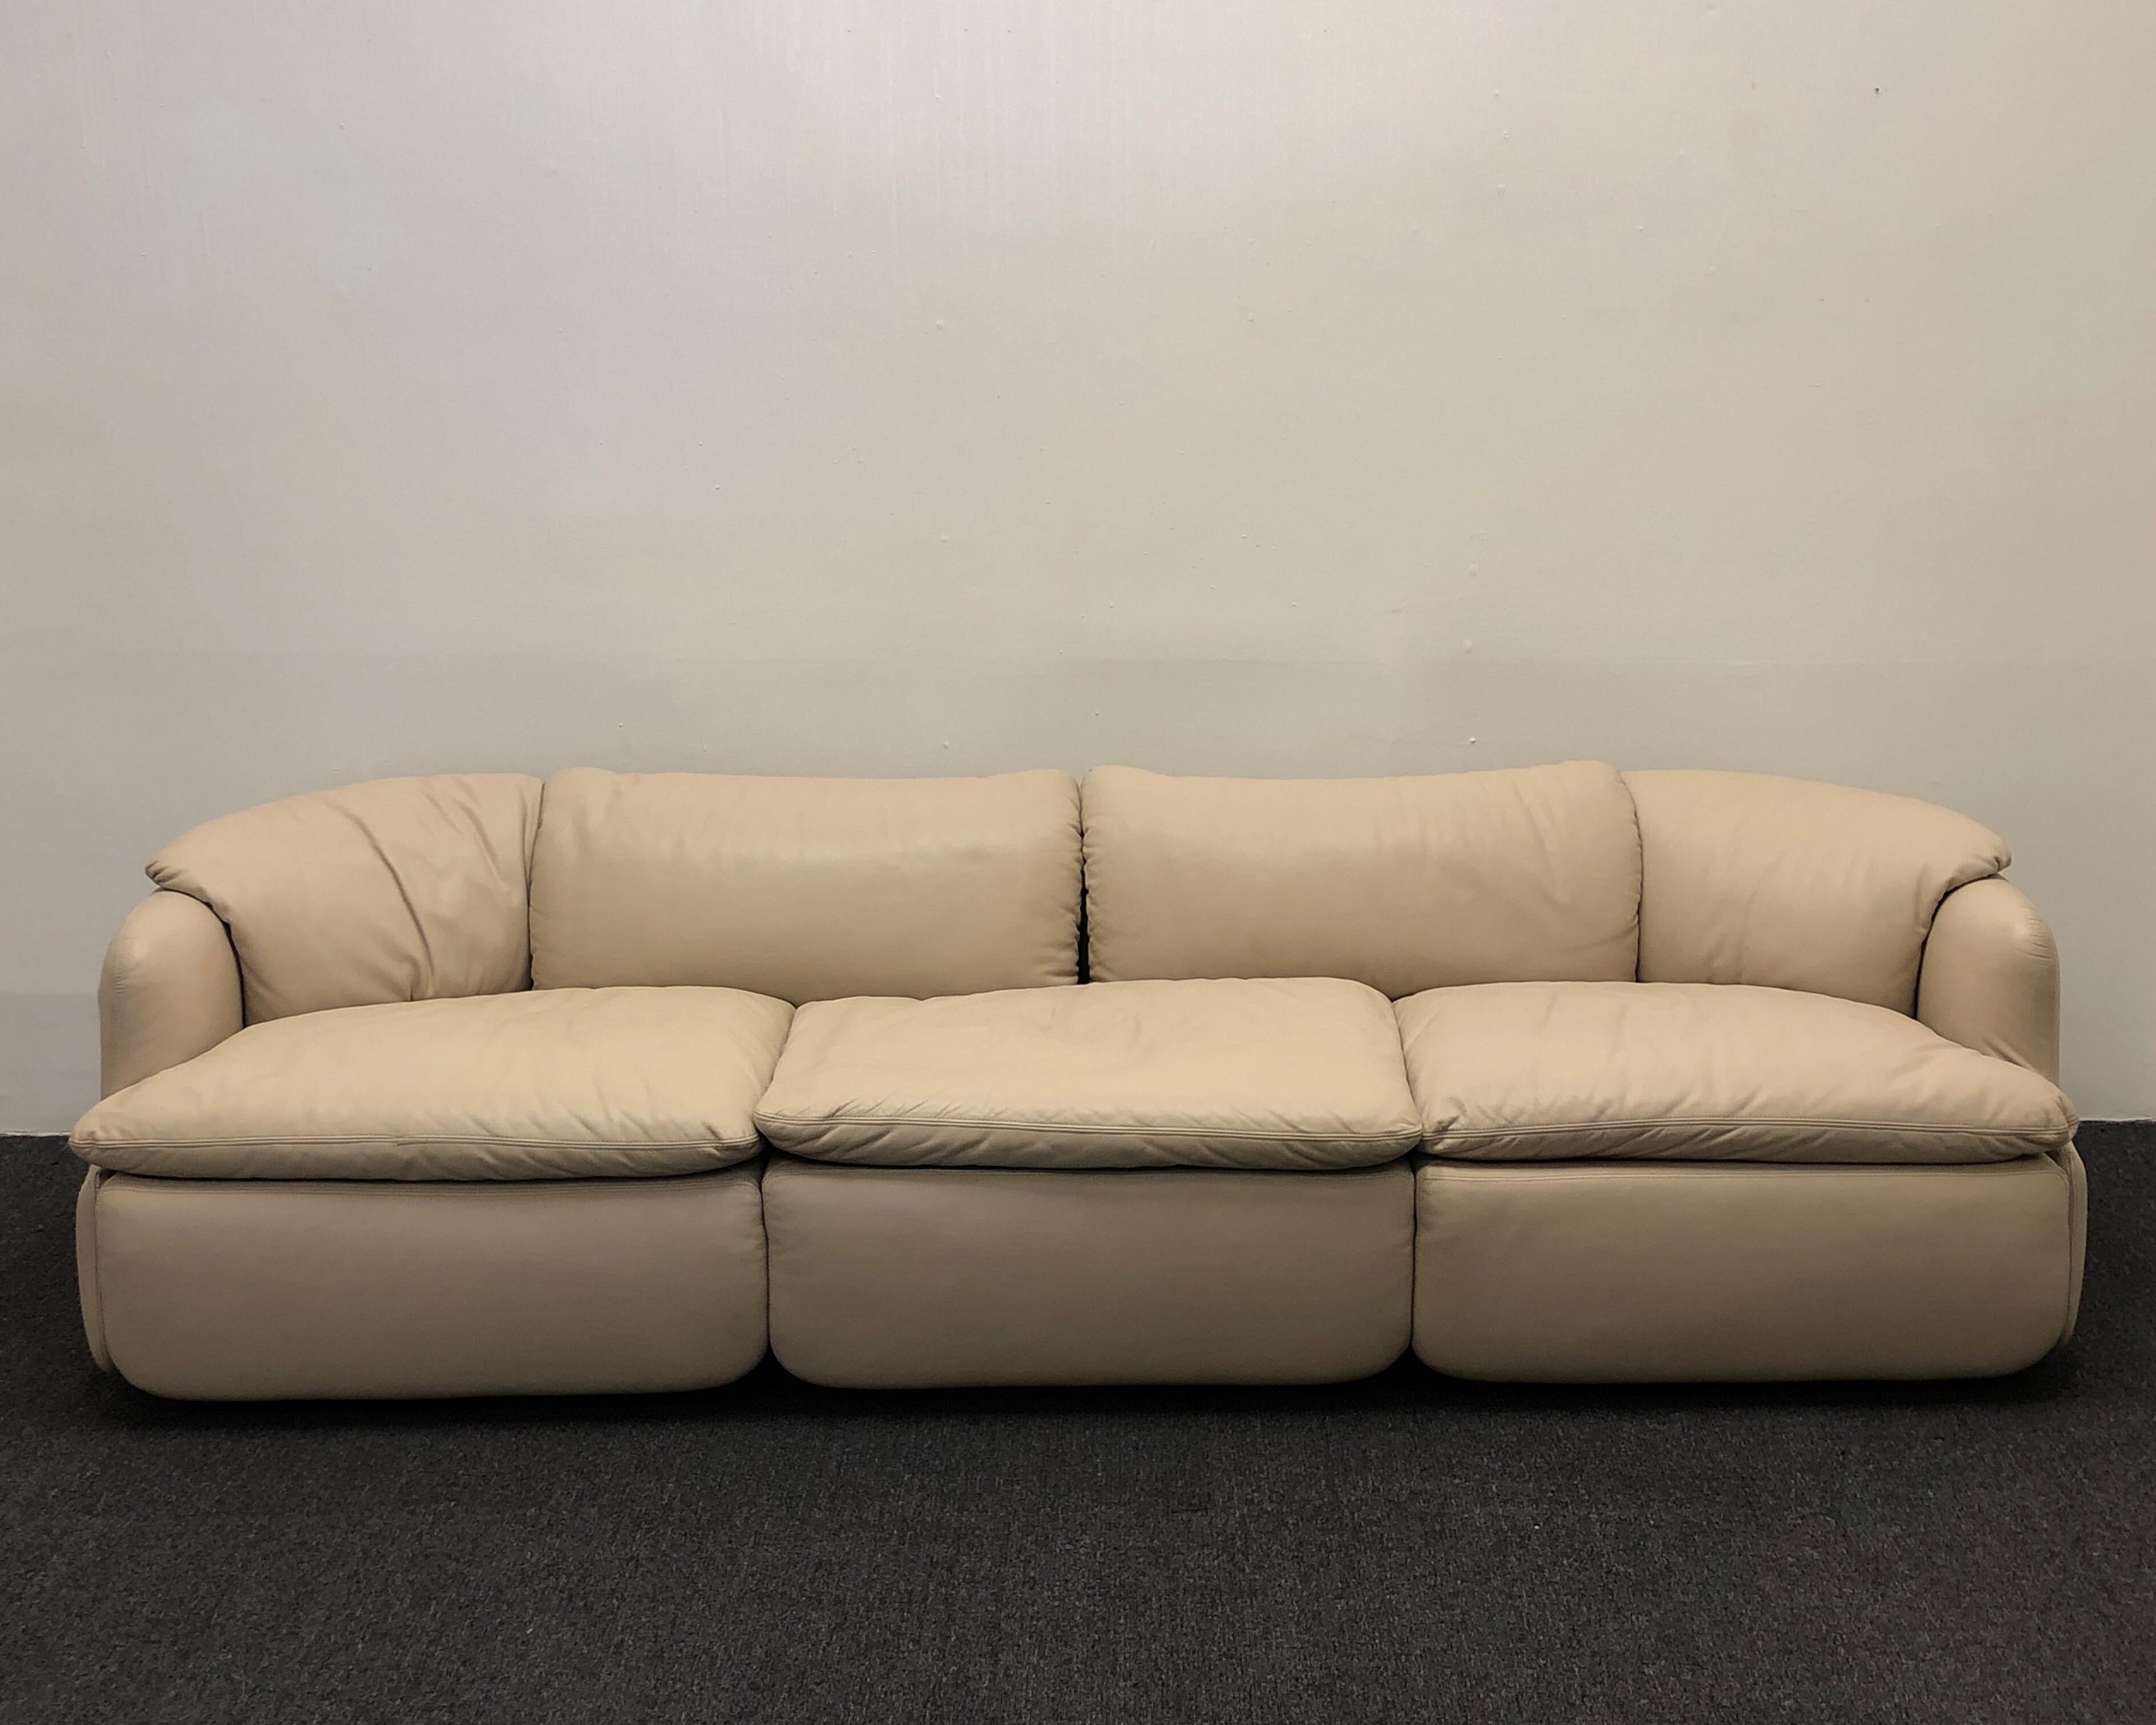 1970’s off white leather ‘Confidential’ sofa design by Italian architect Alberto Rosselli for Saporiti Italia. 
Professionally cleaned and condition. 
Measurements: 91” wide, 32” deep, 24” high and 16” seat.